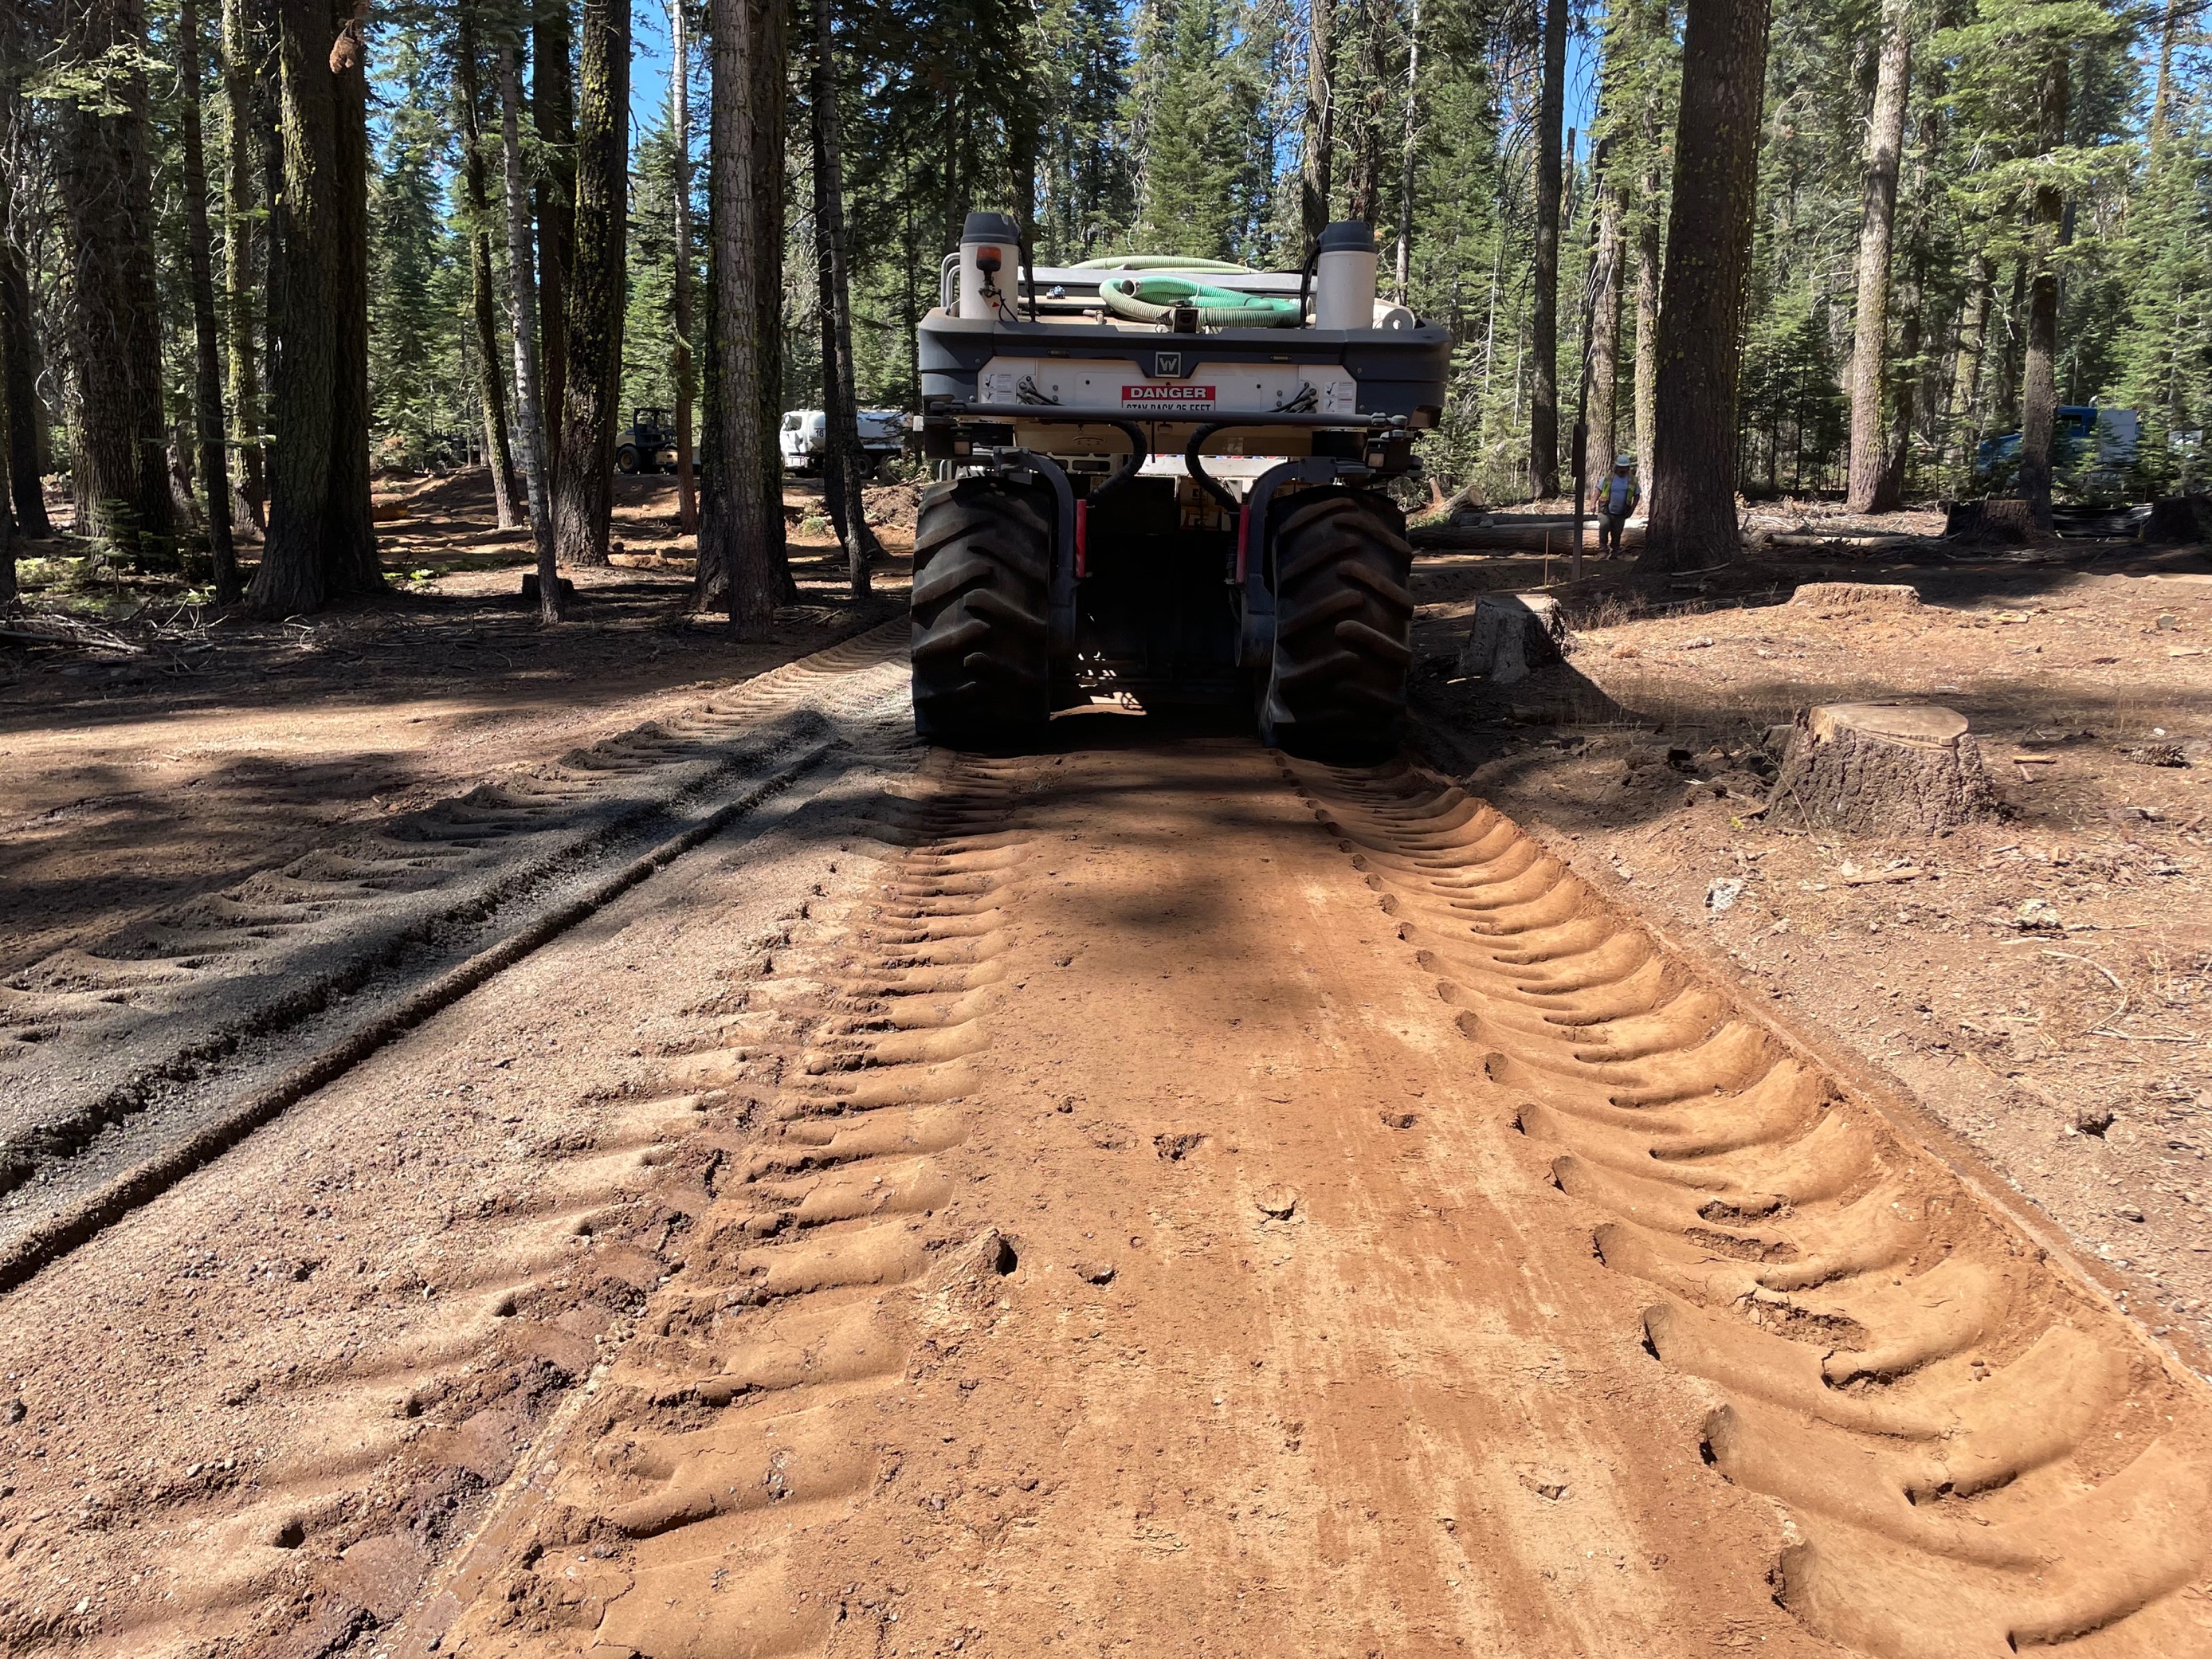 Large tire prints are left in the dirt road by a large construction vehicle in the forest.